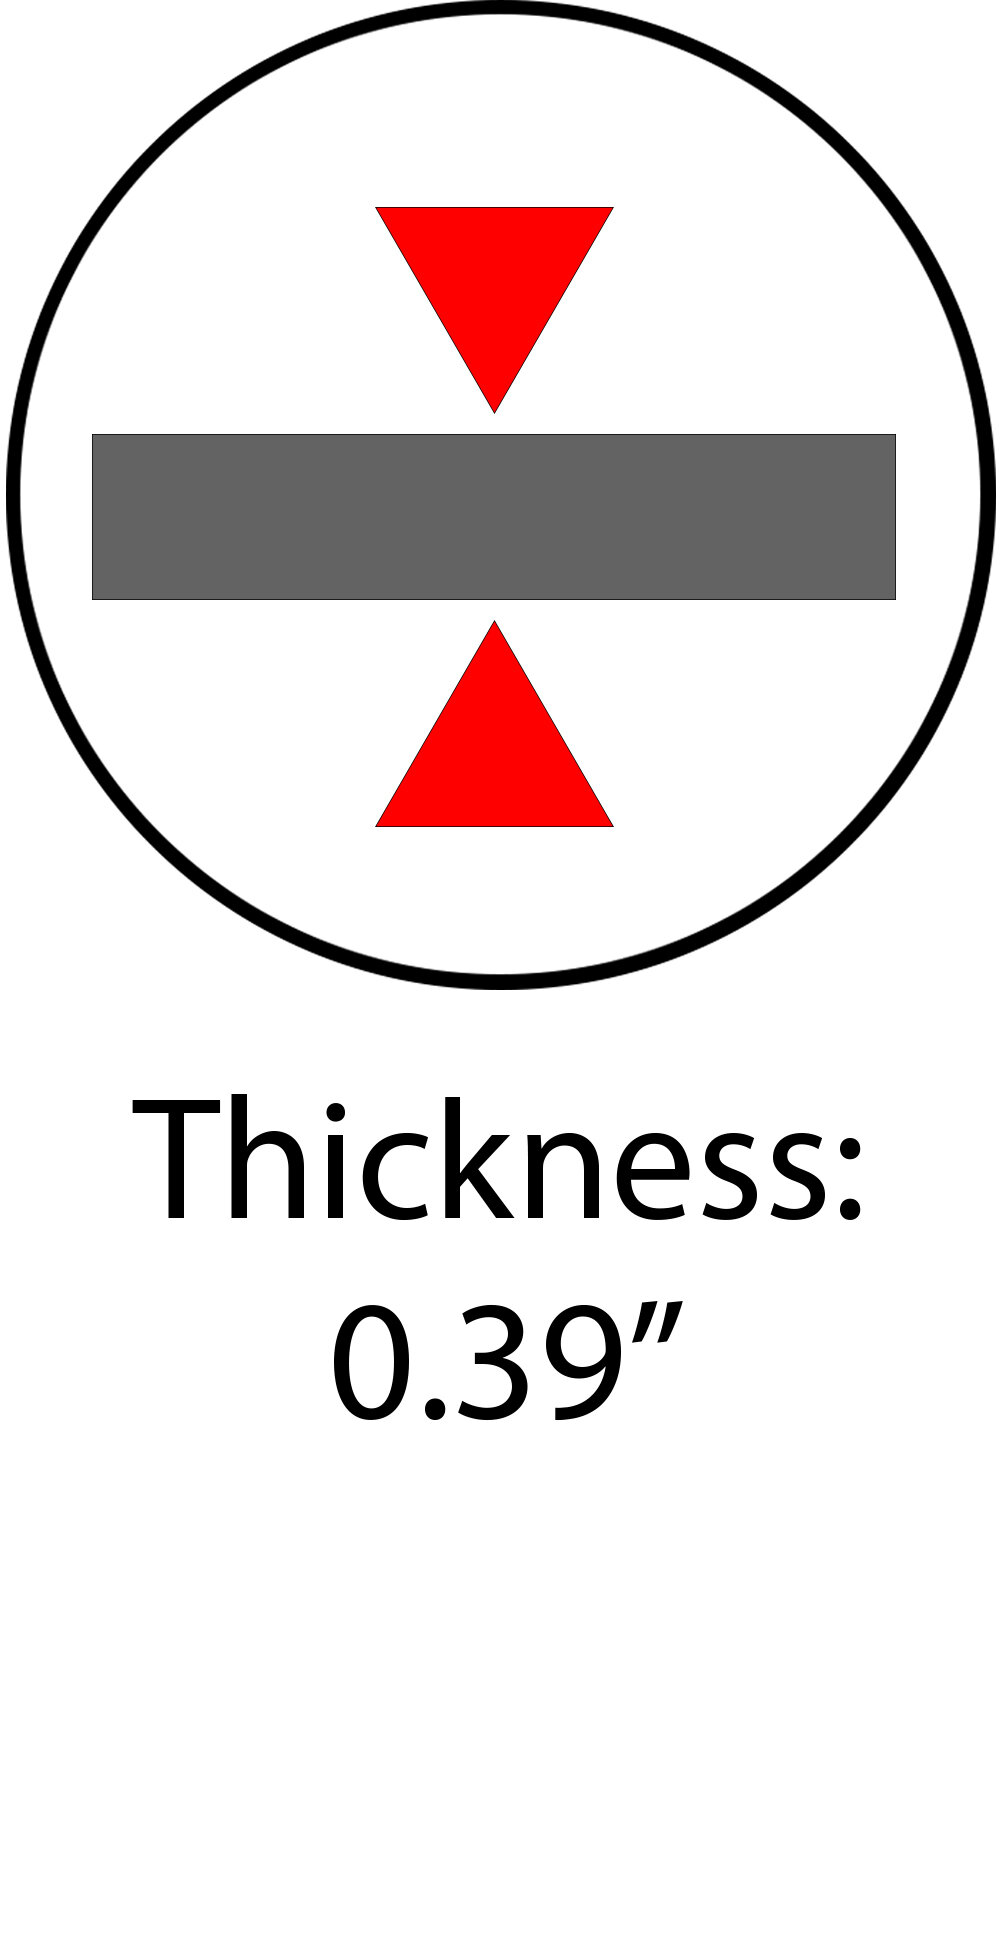 08_Thickness_0 pt 39 Inches.jpg